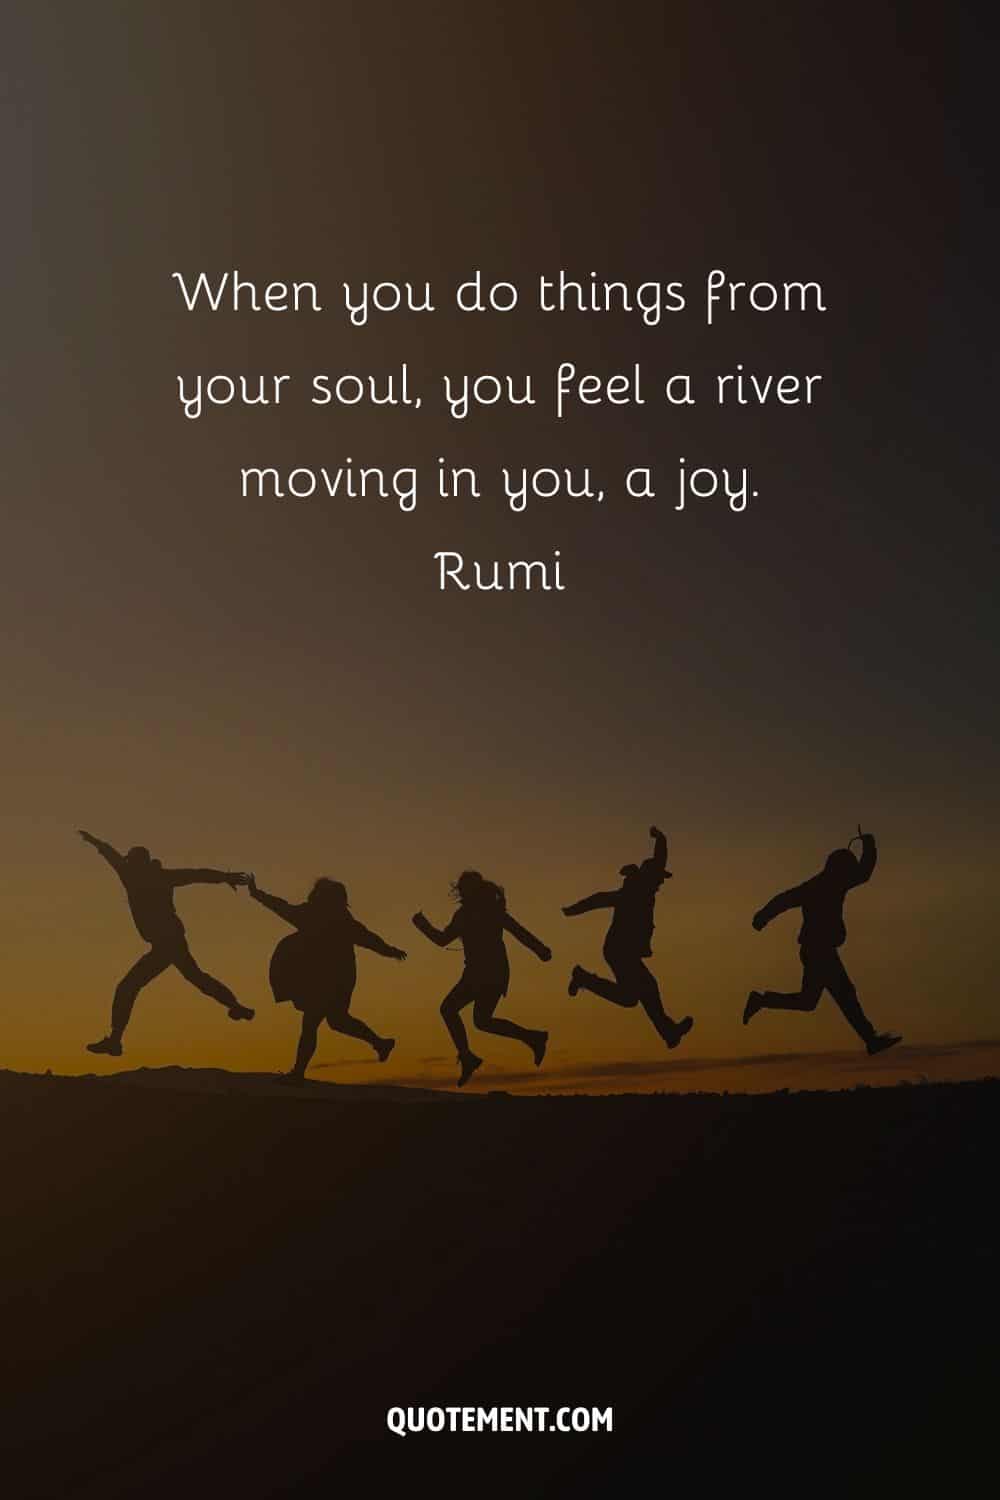 a group of dancing people image representing extraordinary quote on joy